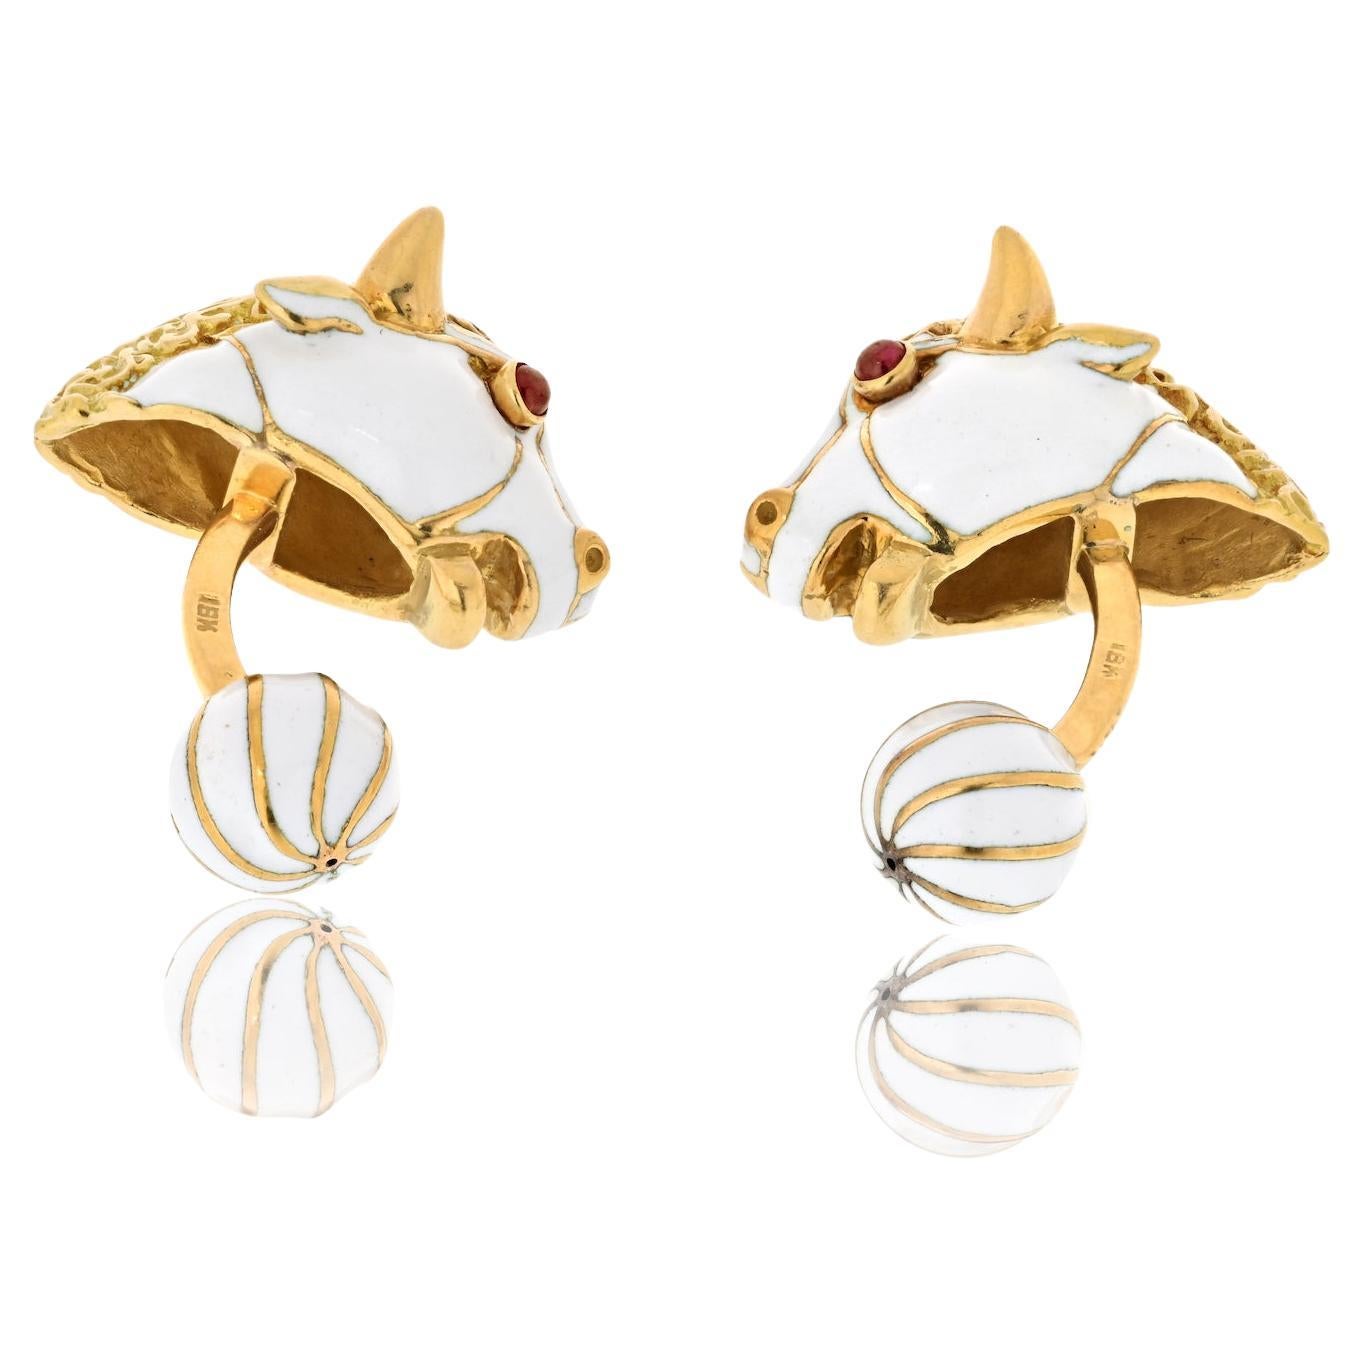 Indulge in the bold and charismatic allure of these David Webb 18k yellow gold cufflinks – a unique masterpiece that captures the essence of strength and style. Crafted in the likeness of two majestic bulls, these cufflinks are adorned with striking